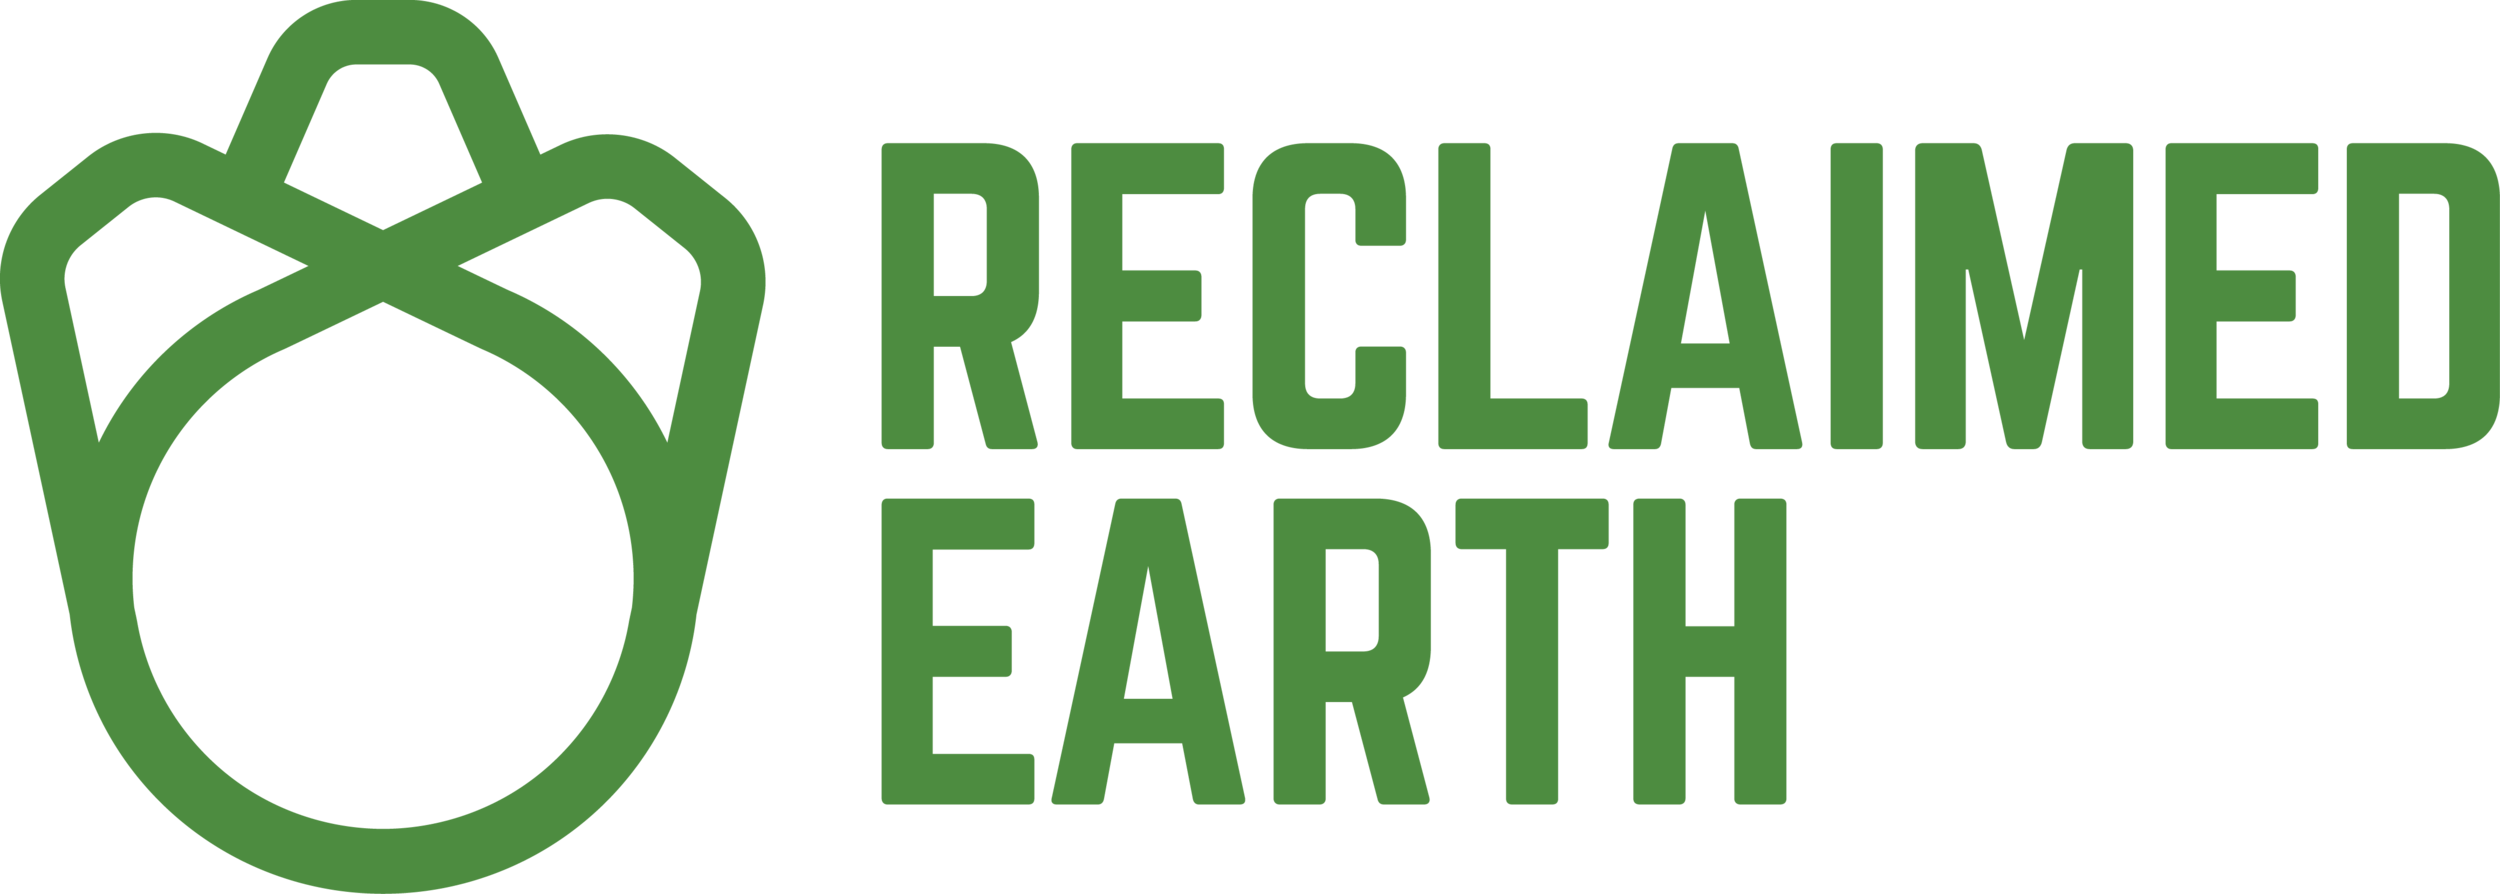 reclaimed earth logo.png